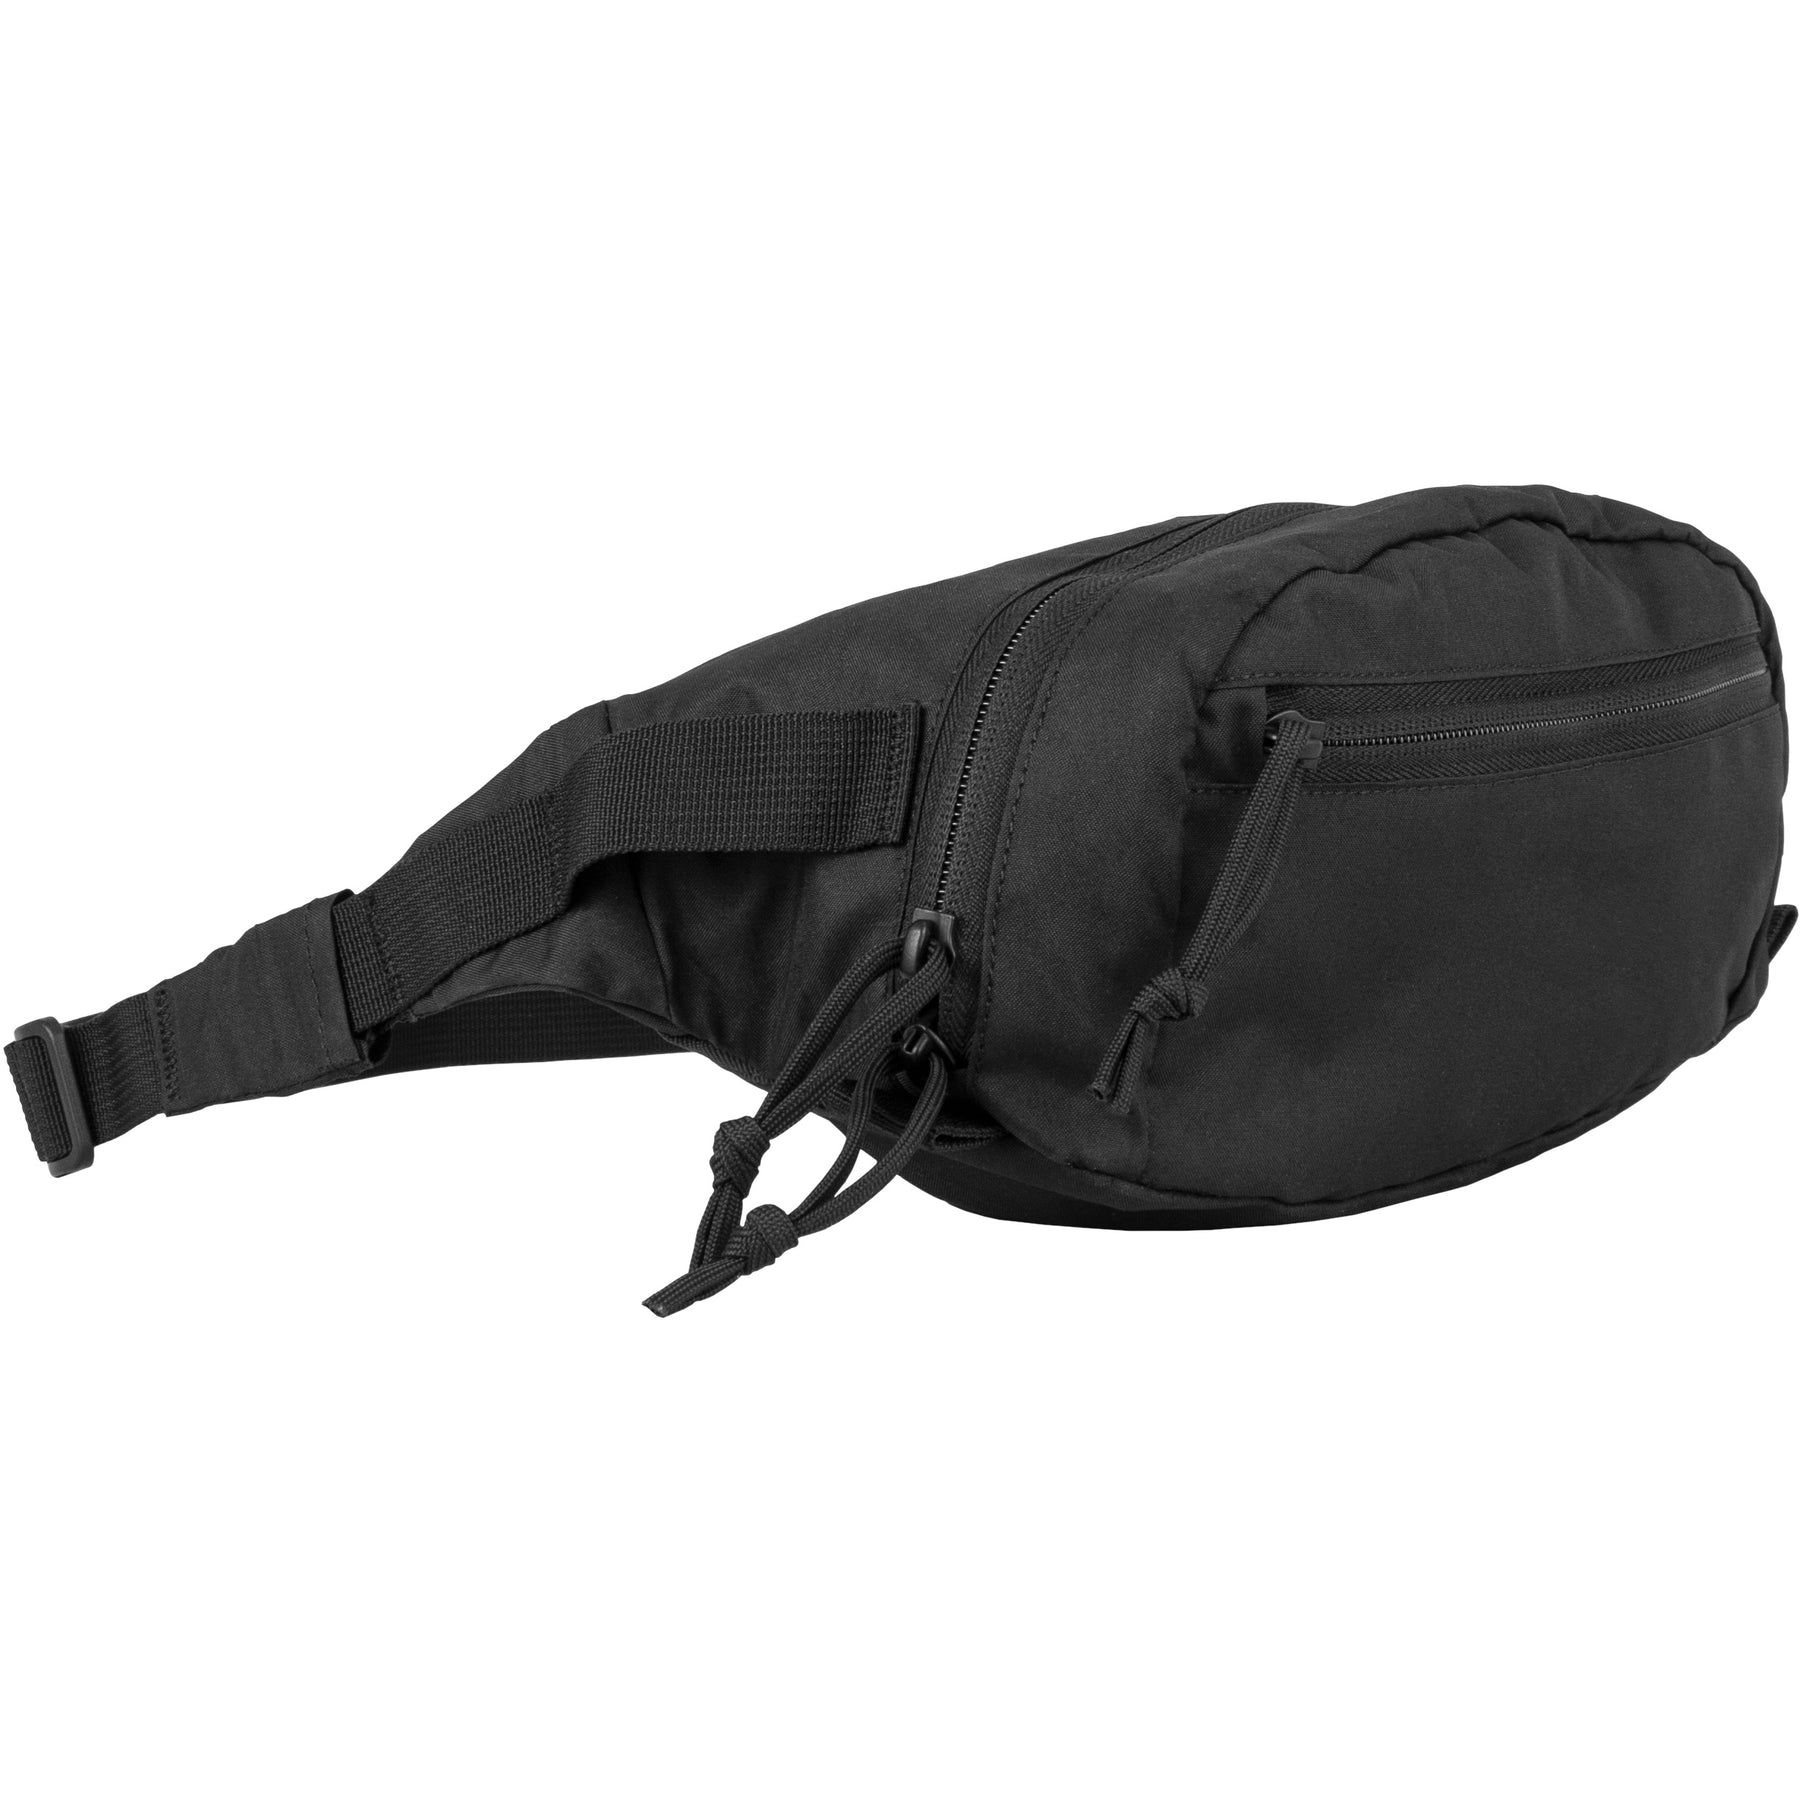 3-in-1 CCW Fanny Pack. 52-41.